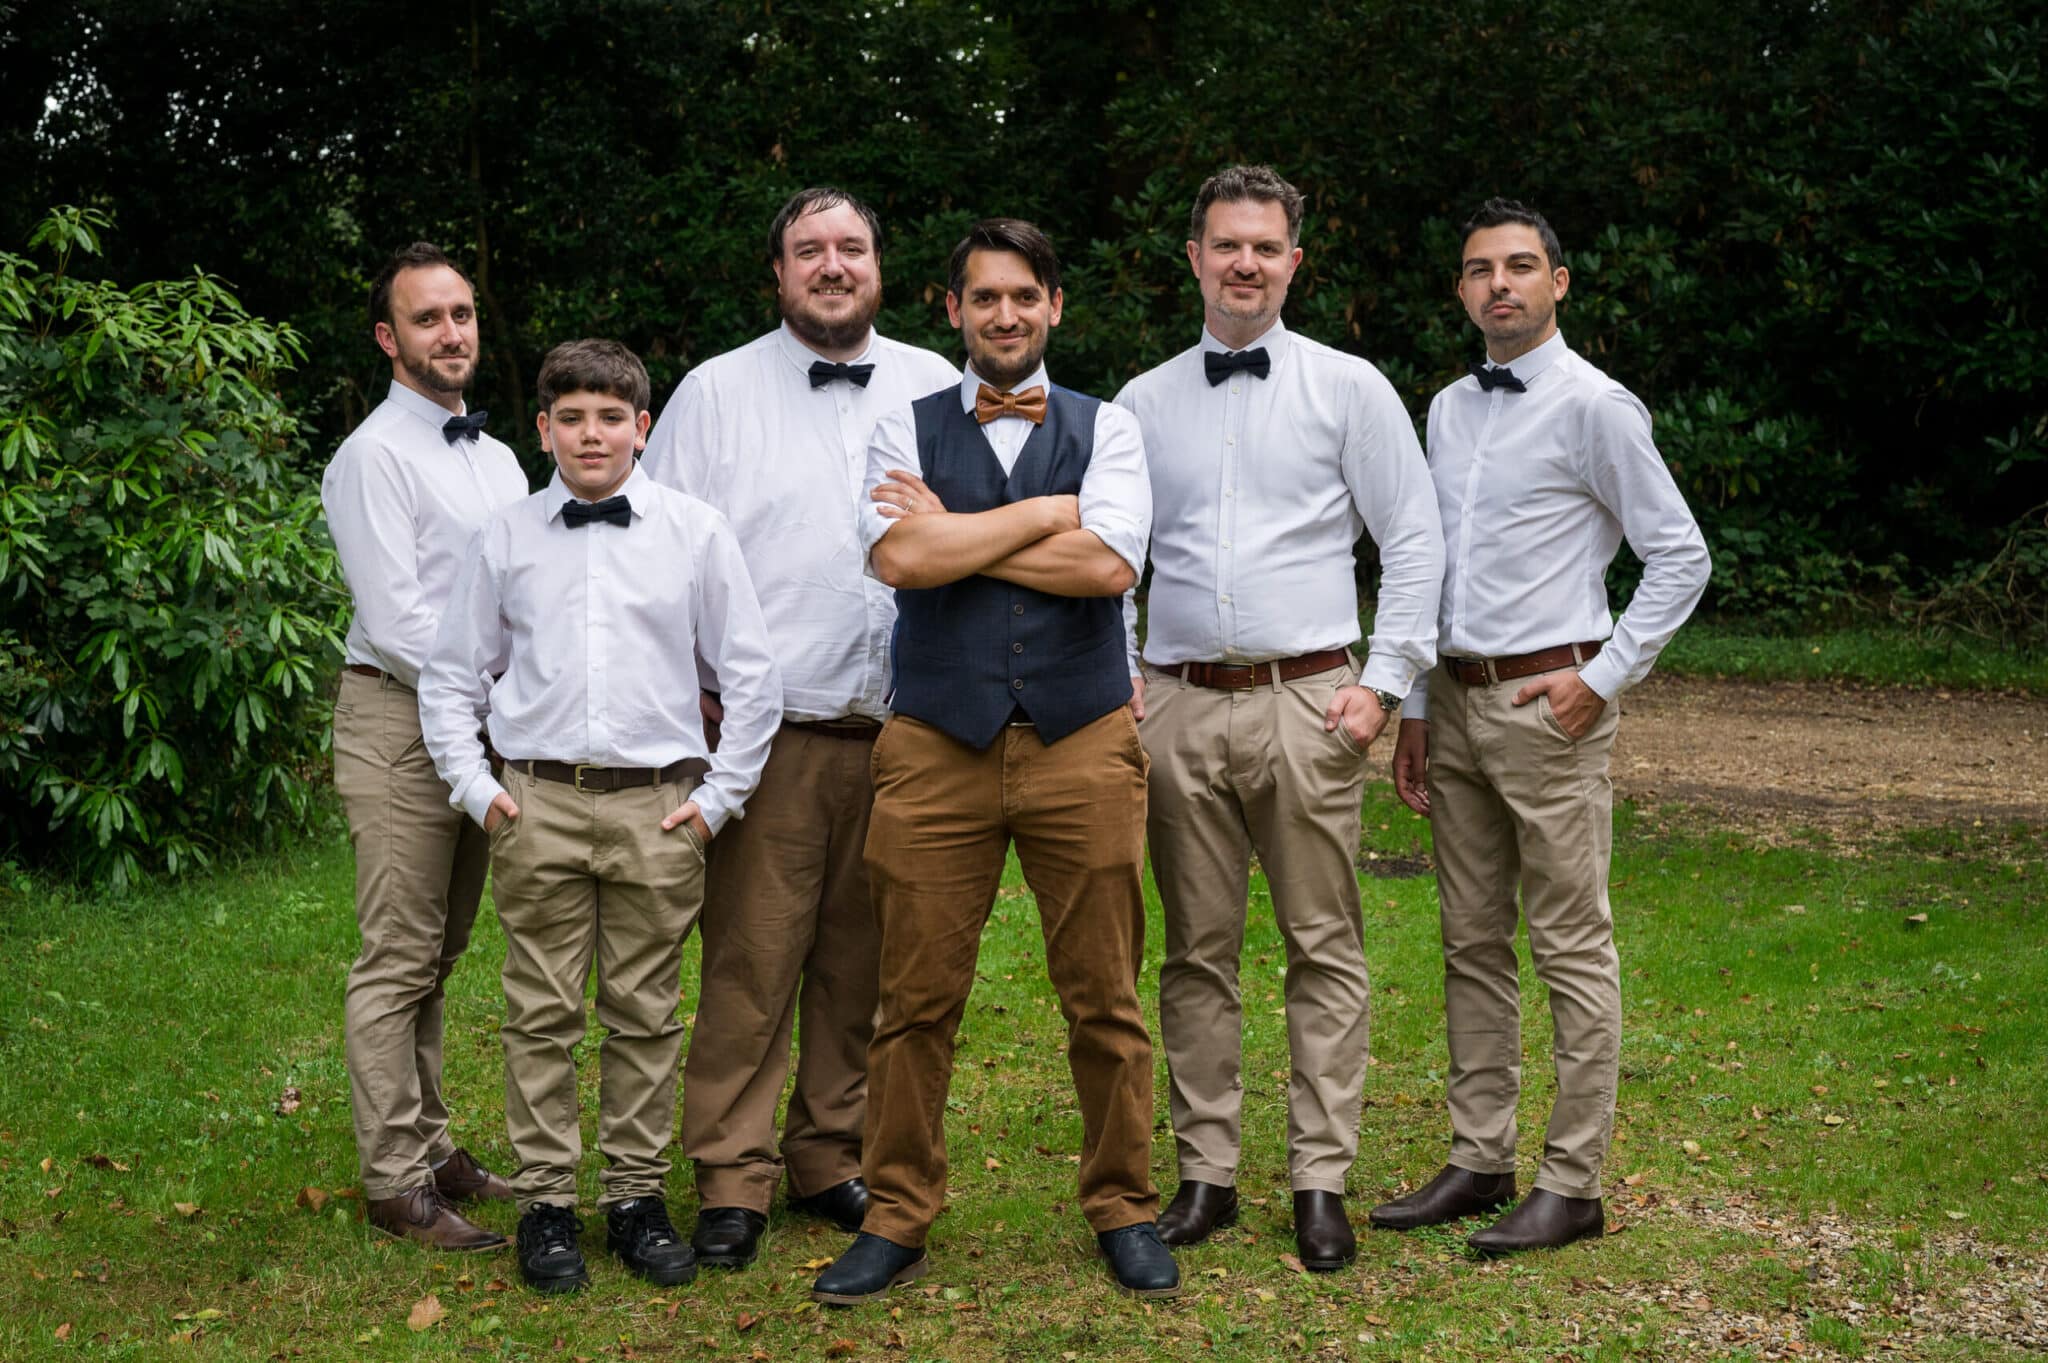 GRooms party at Weddings in the Wood